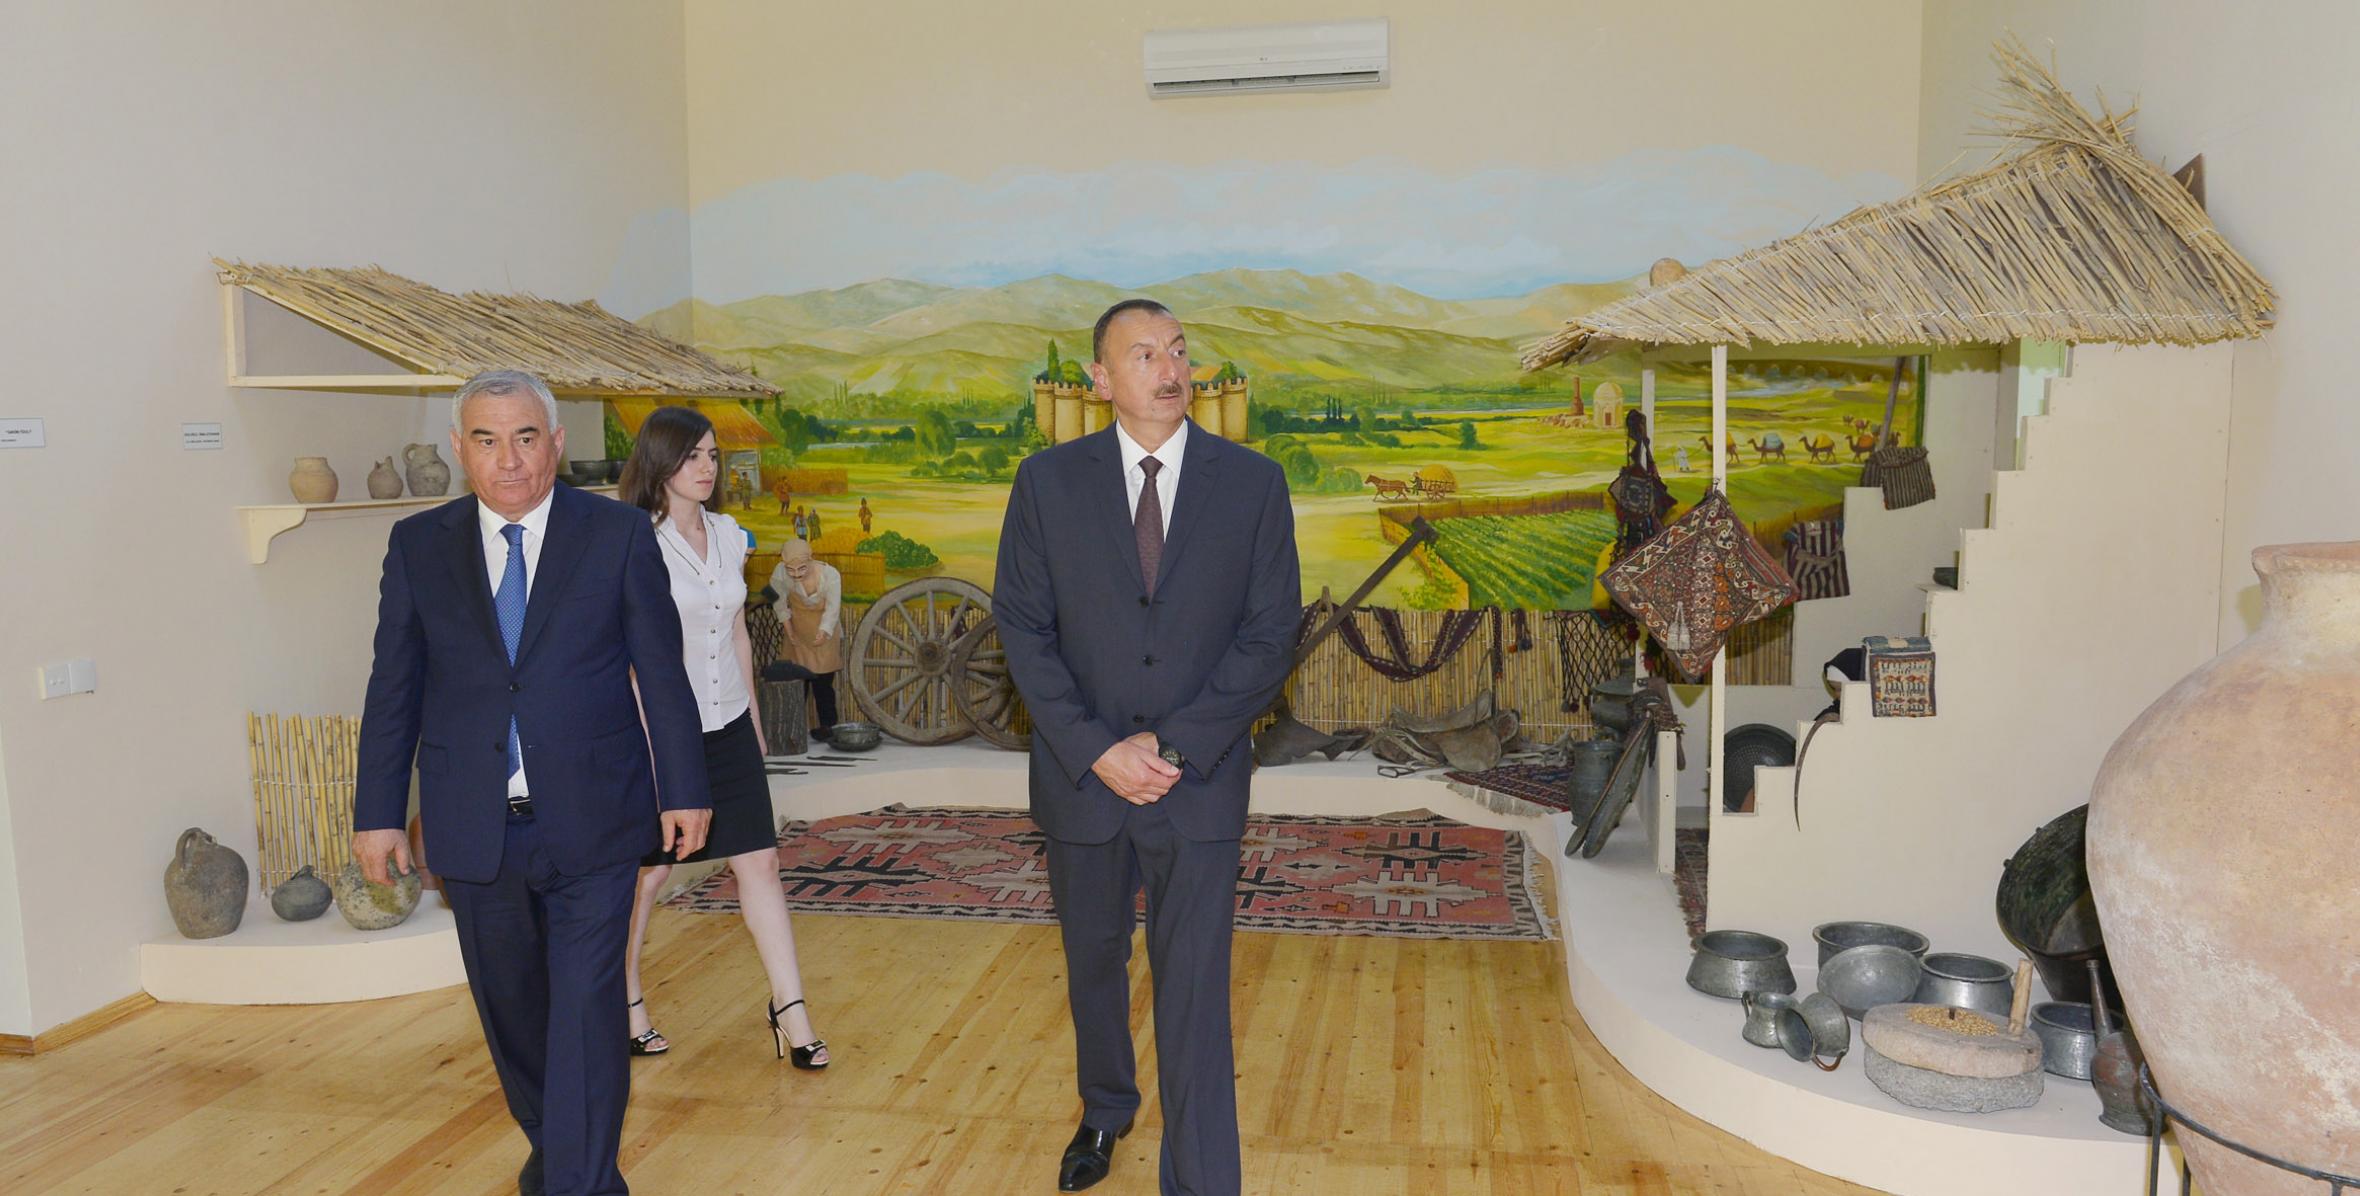 Ilham Aliyev attended the opening of the Fuzuli district museum of history and local lore